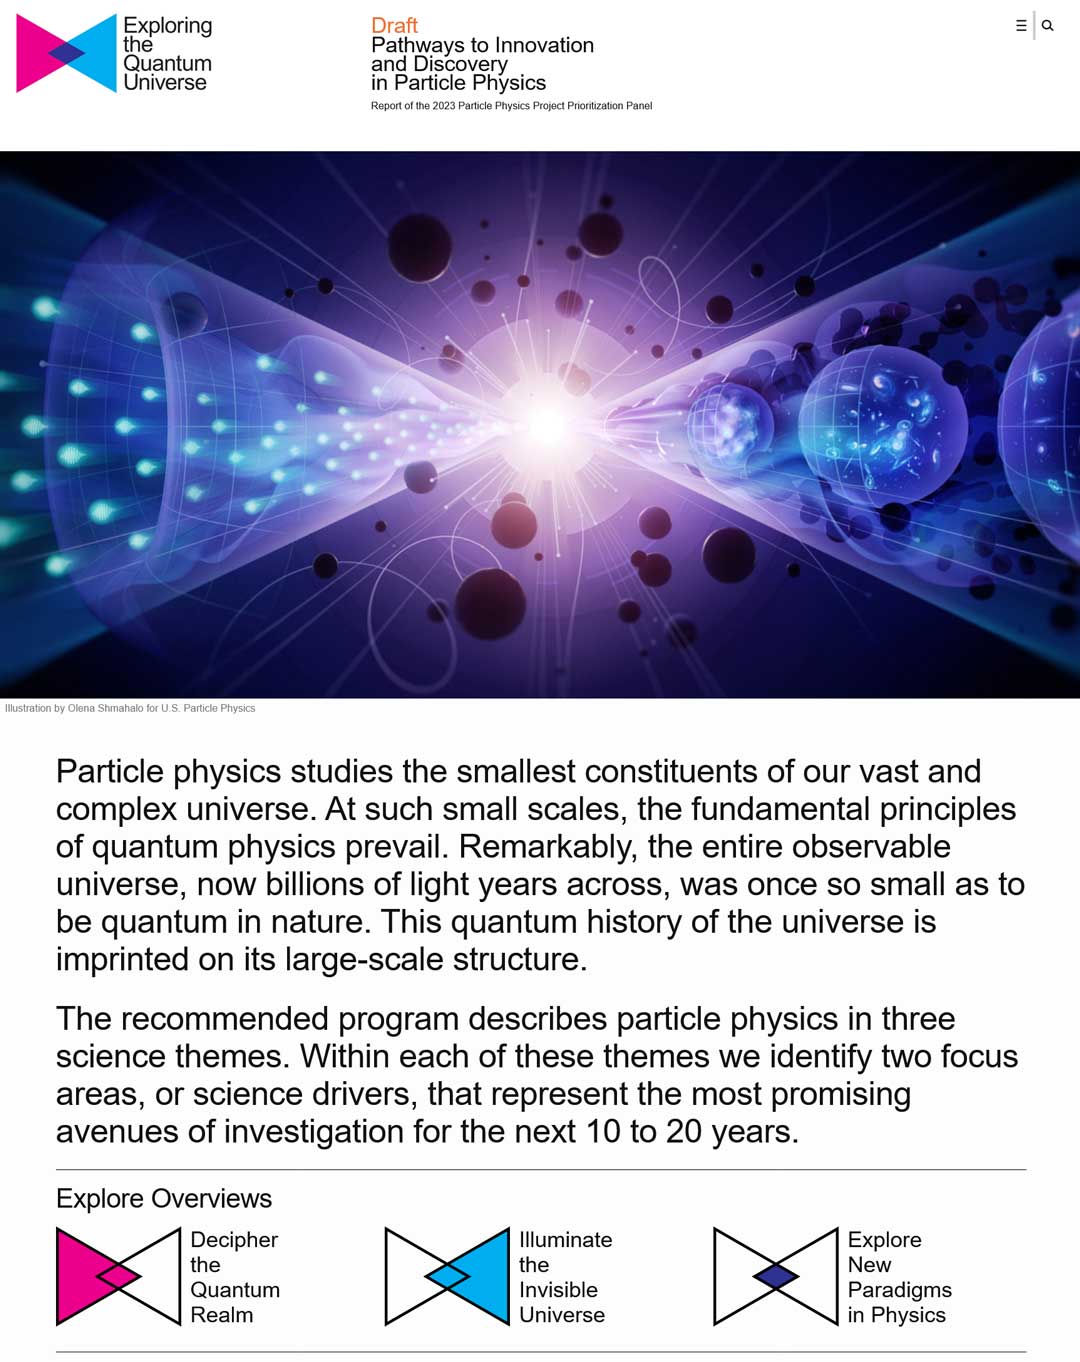 Screenshot of the P5 Physics Report homepage — https://www.usparticlephysics.org/2023-p5-report/ — featuring a semi-abstract scientific art depicting phenomena in particle physics and astrophysics. Illustration by Olena Shmahalo for U.S. Particle Physics.